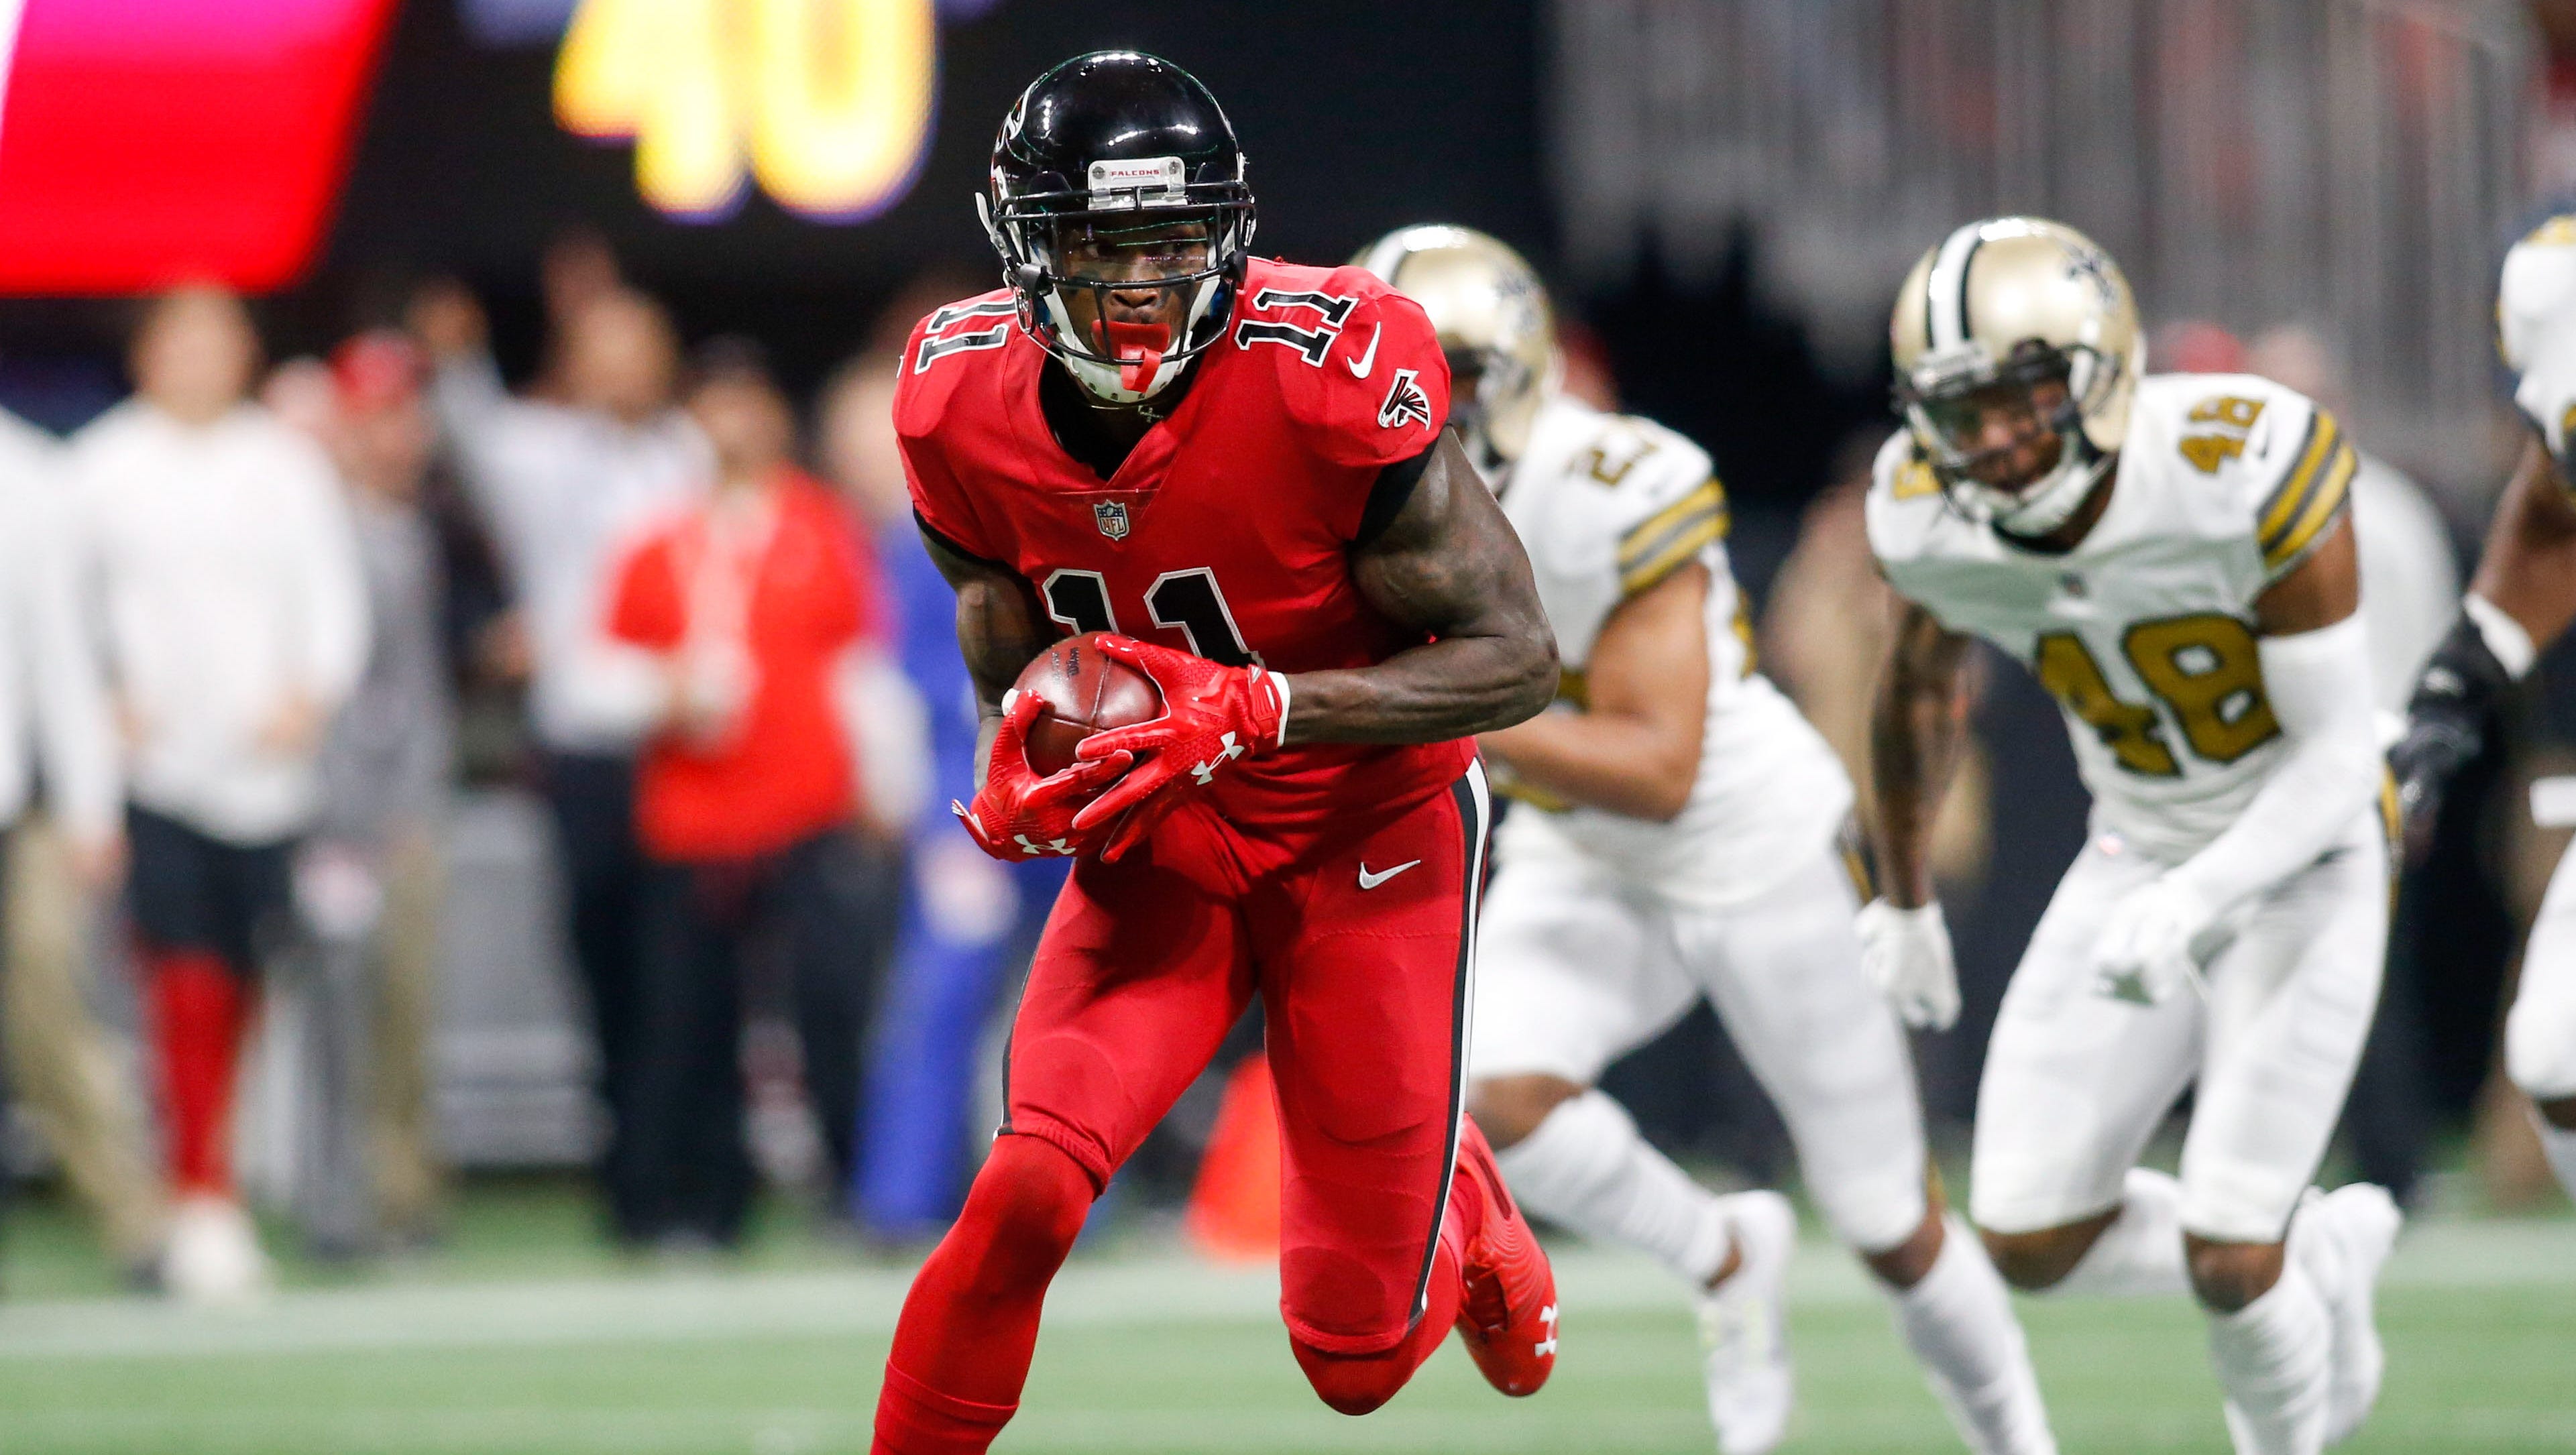 Atlanta Falcons wide receiver Julio Jones (11) runs after a catch against the New Orleans Saints in the first quarter at Mercedes-Benz Stadium.